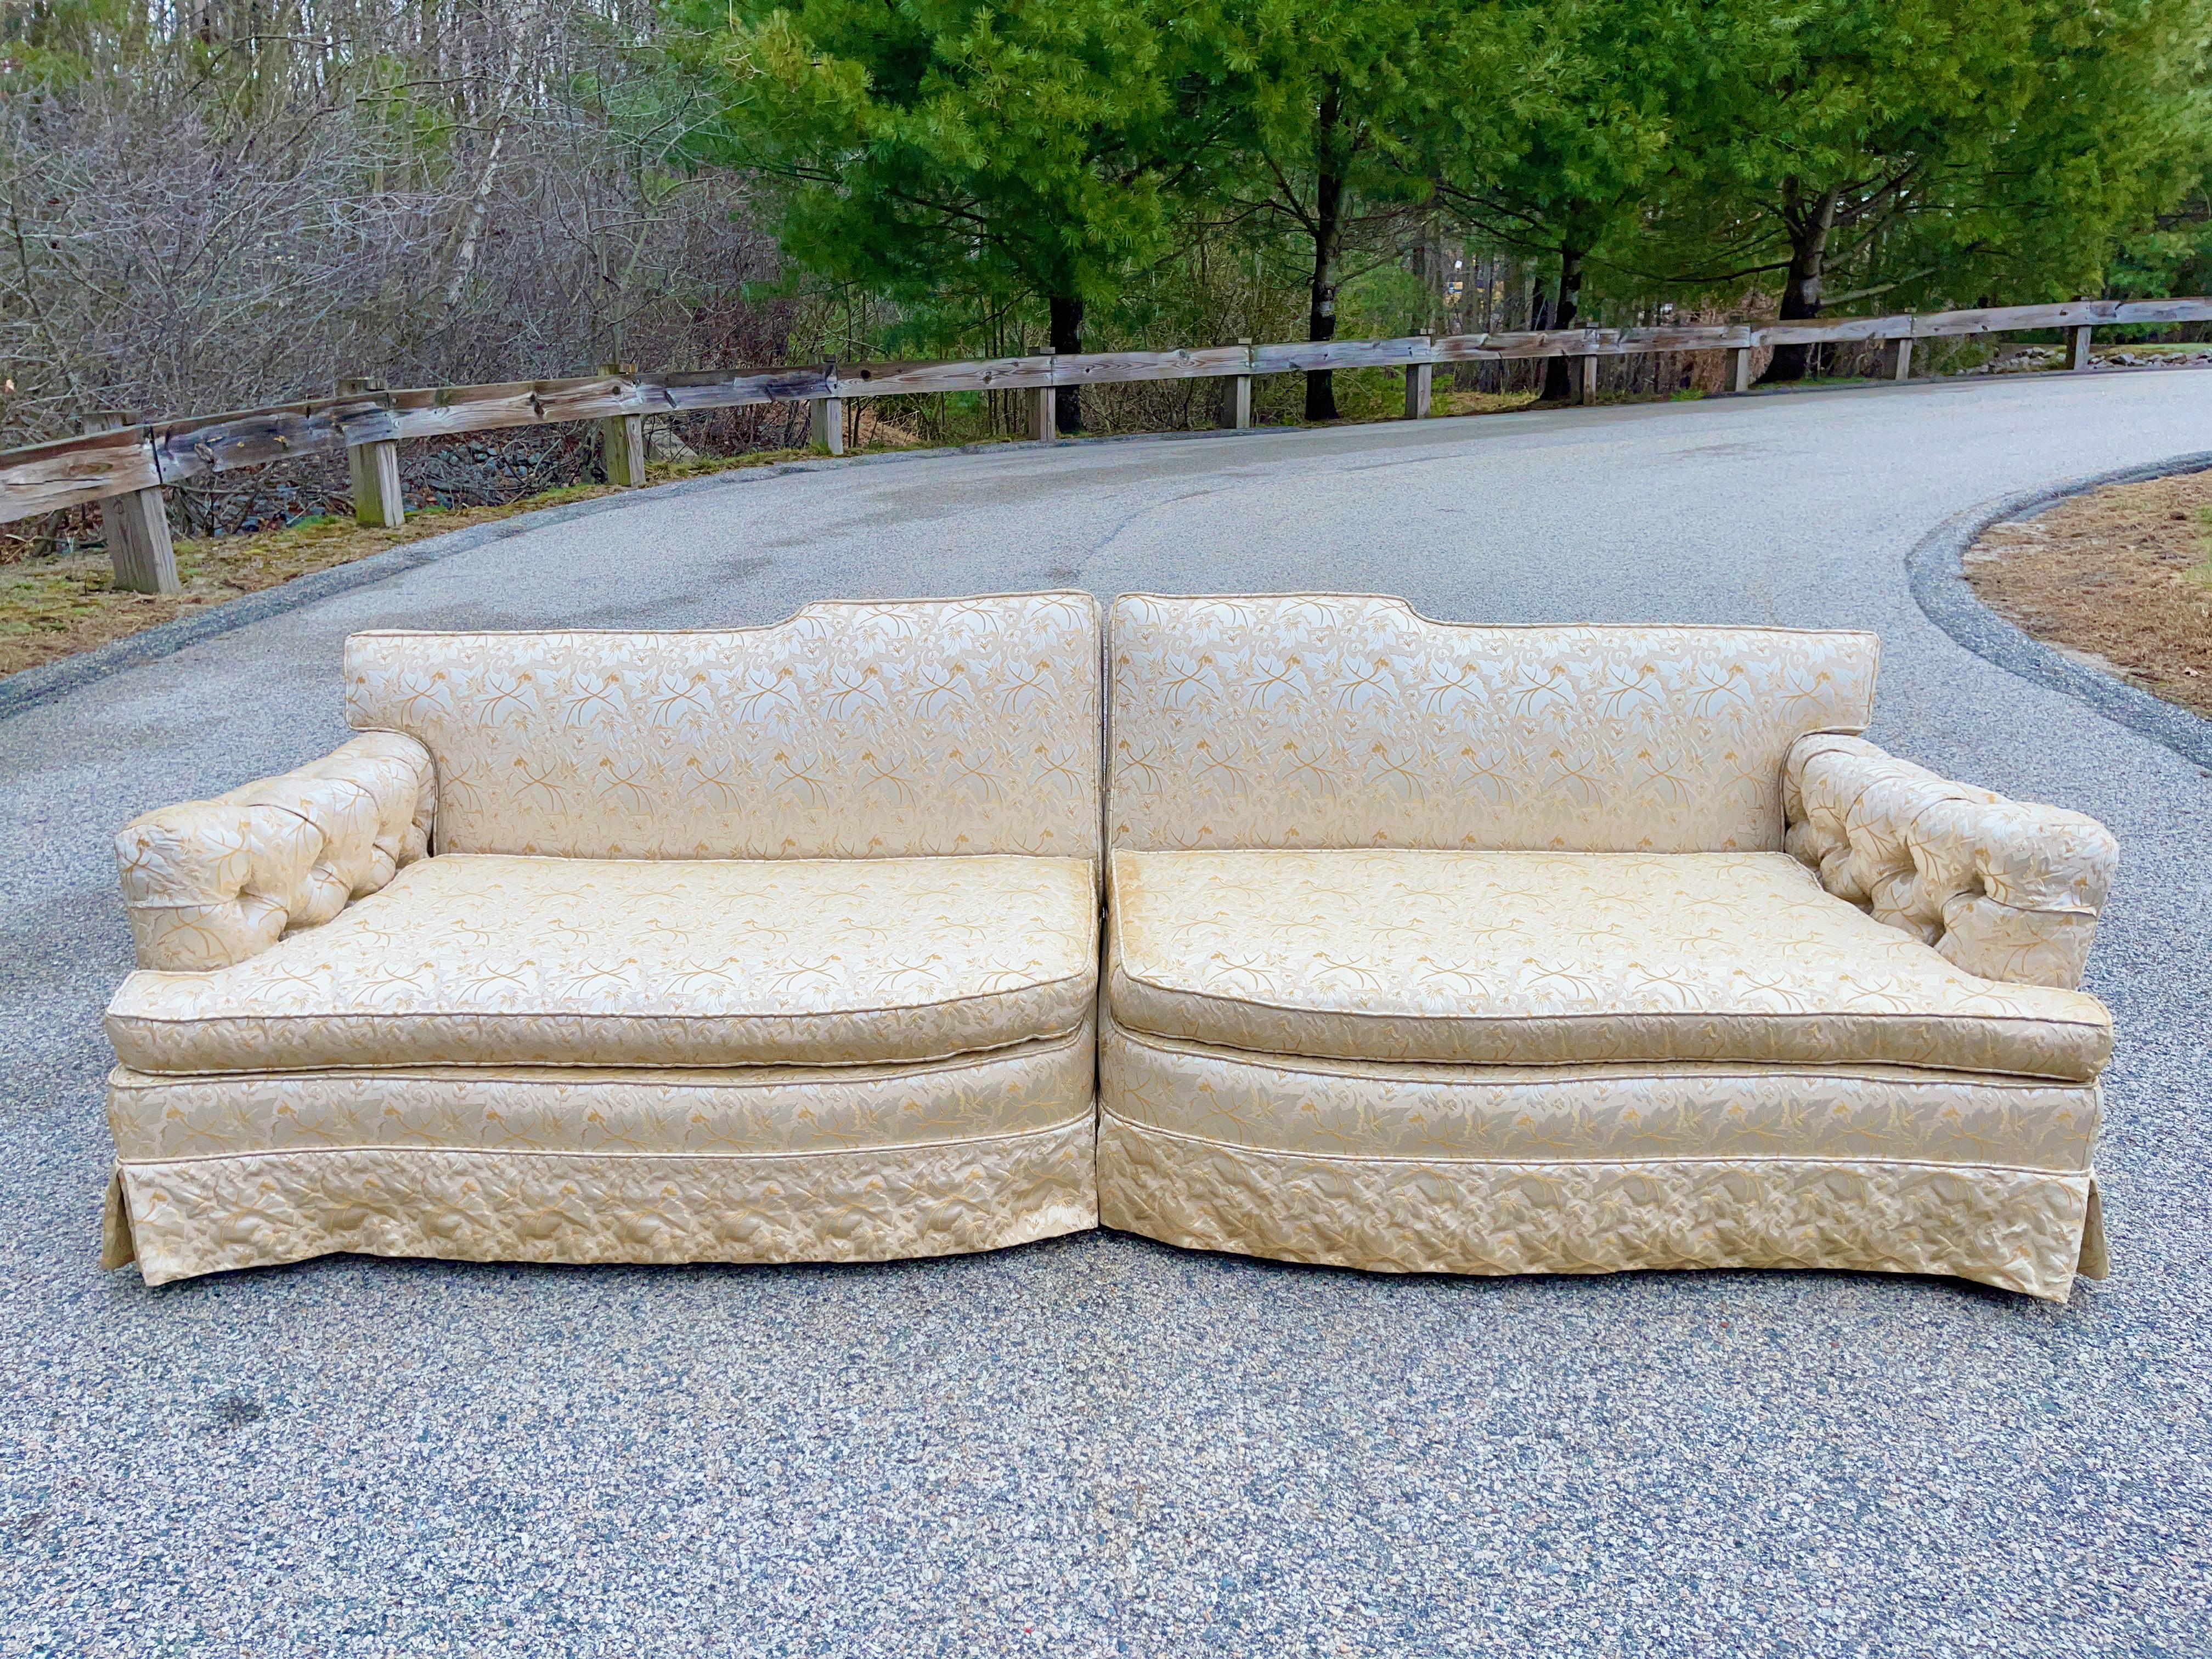 This custom made upholstered two piece sofa came from an outrageously over-the-top period Hollywood Regency decorated home outside of Boston. Think Zsa Zsa, Eva and Magda on steroids.
This fabric is embroidered gold thread on a shimmering platinum